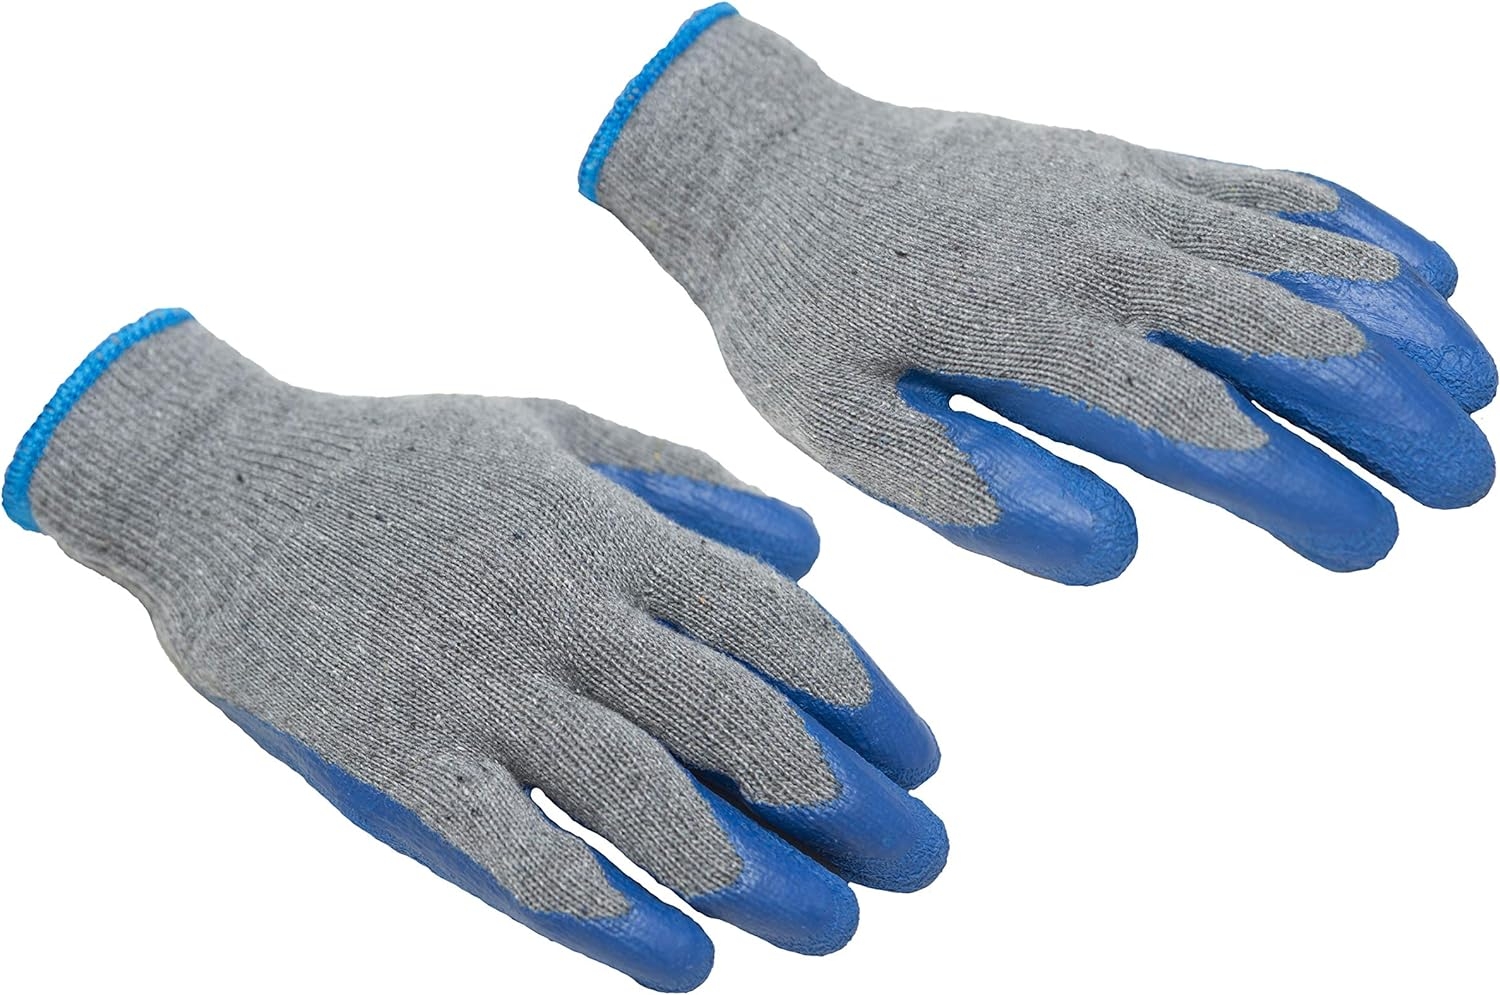 G & F Products - 3100S-10 120 Pairs Small Rubber Latex Double Coated Work Gloves for Construction, gardening gloves, heavy duty Cotton Blend Blue